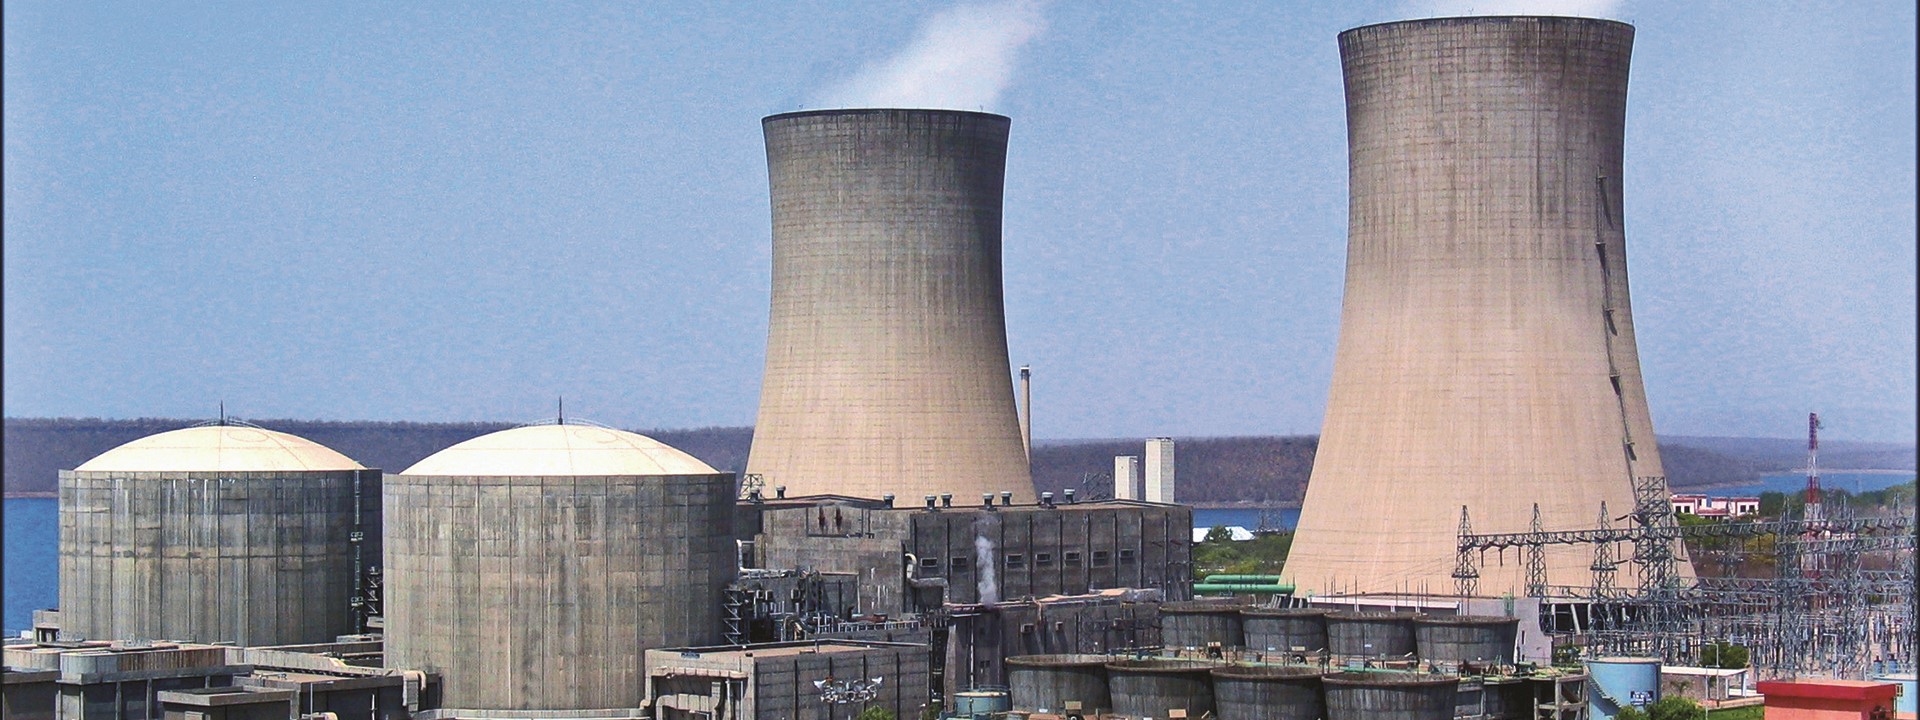 Natural Draft Cooling tower in Rajasthan- L&T Construction